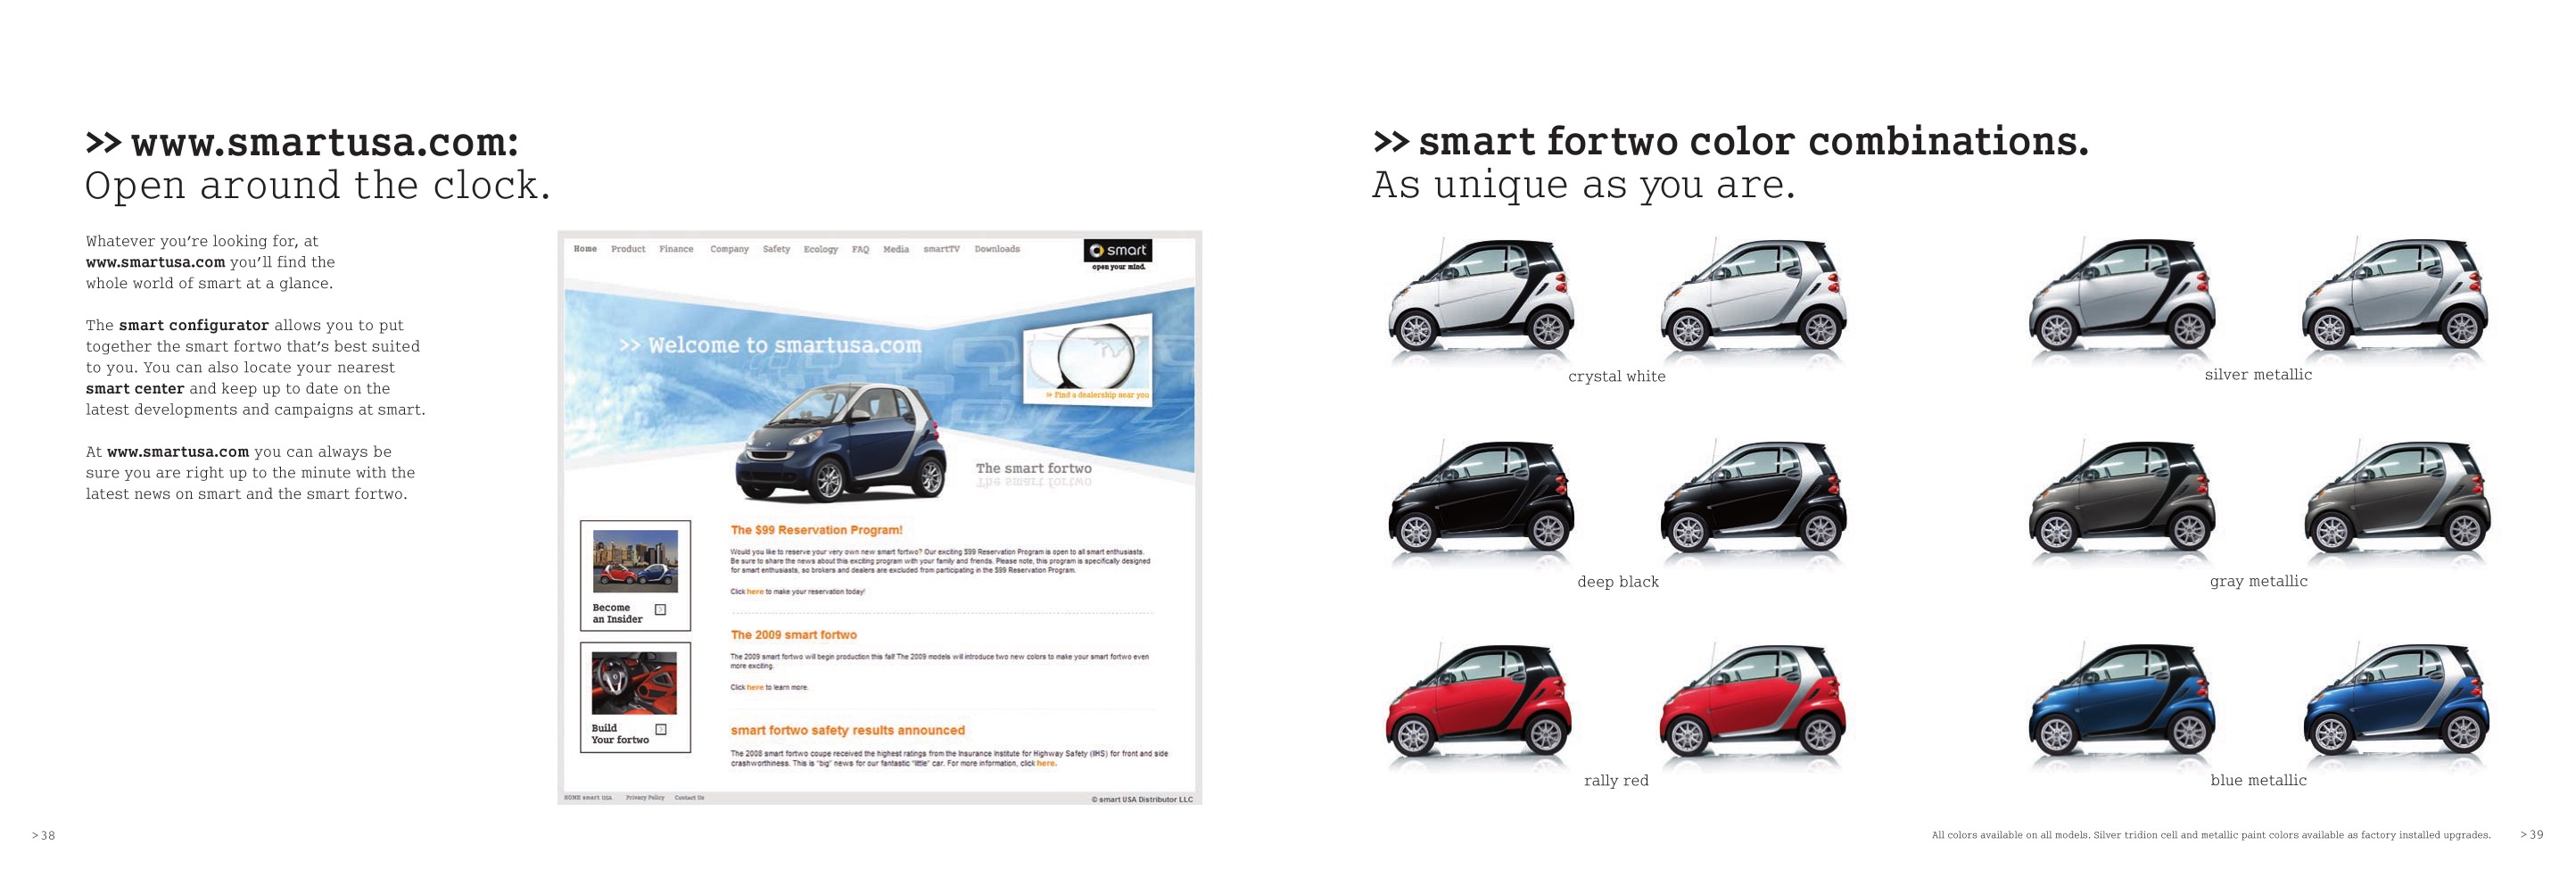 2009 Smart Fortwo Brochure Page 20